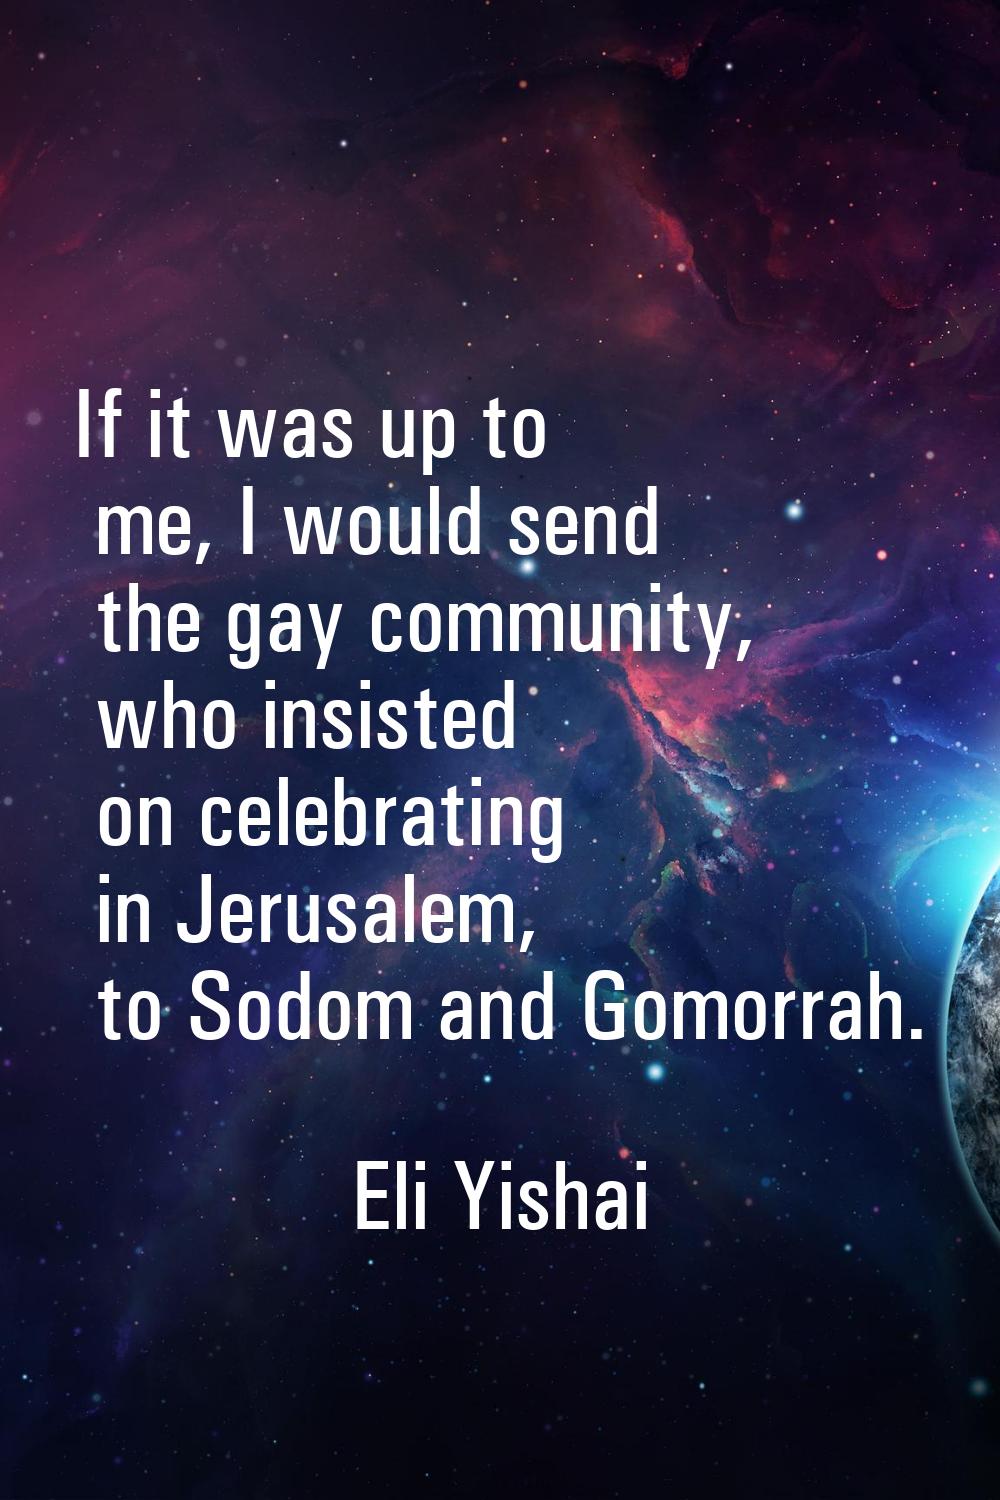 If it was up to me, I would send the gay community, who insisted on celebrating in Jerusalem, to So